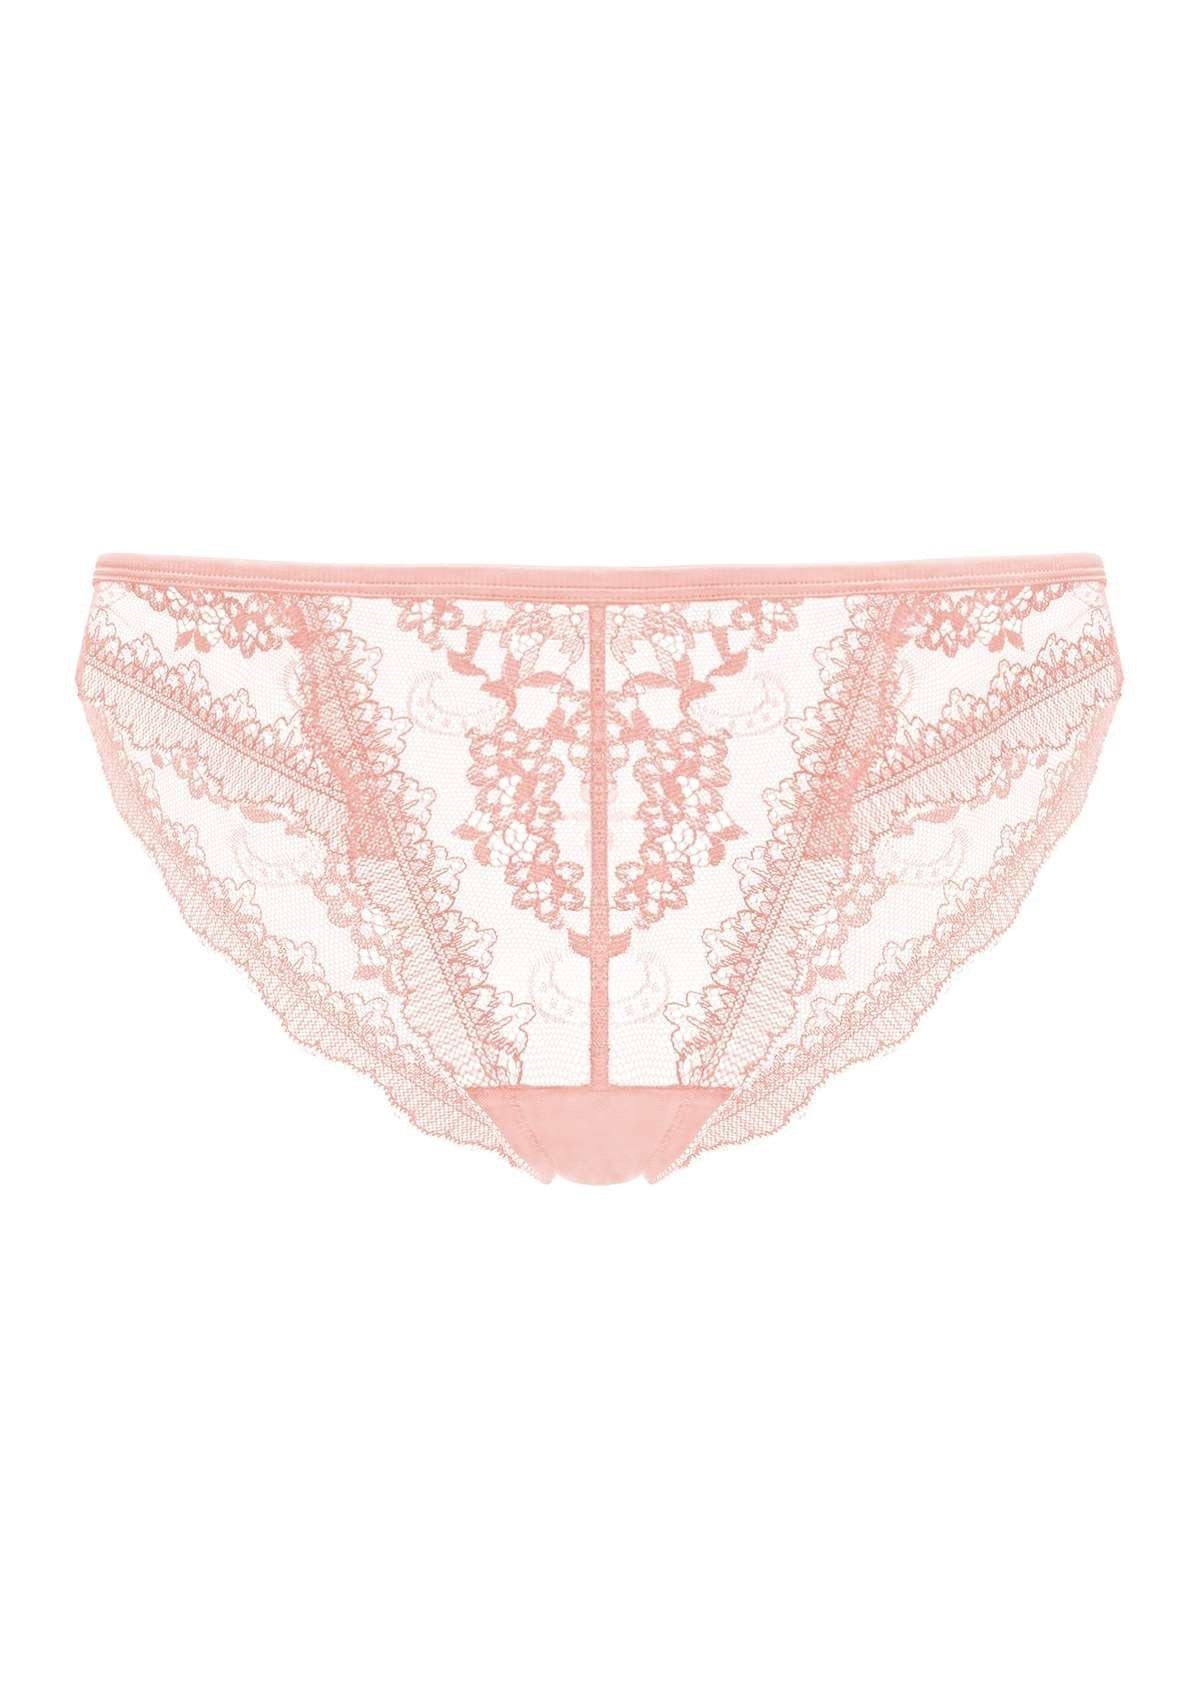 HSIA Floral Bridal Lace Back Cheeky Delicate Underwear  - Pink / M